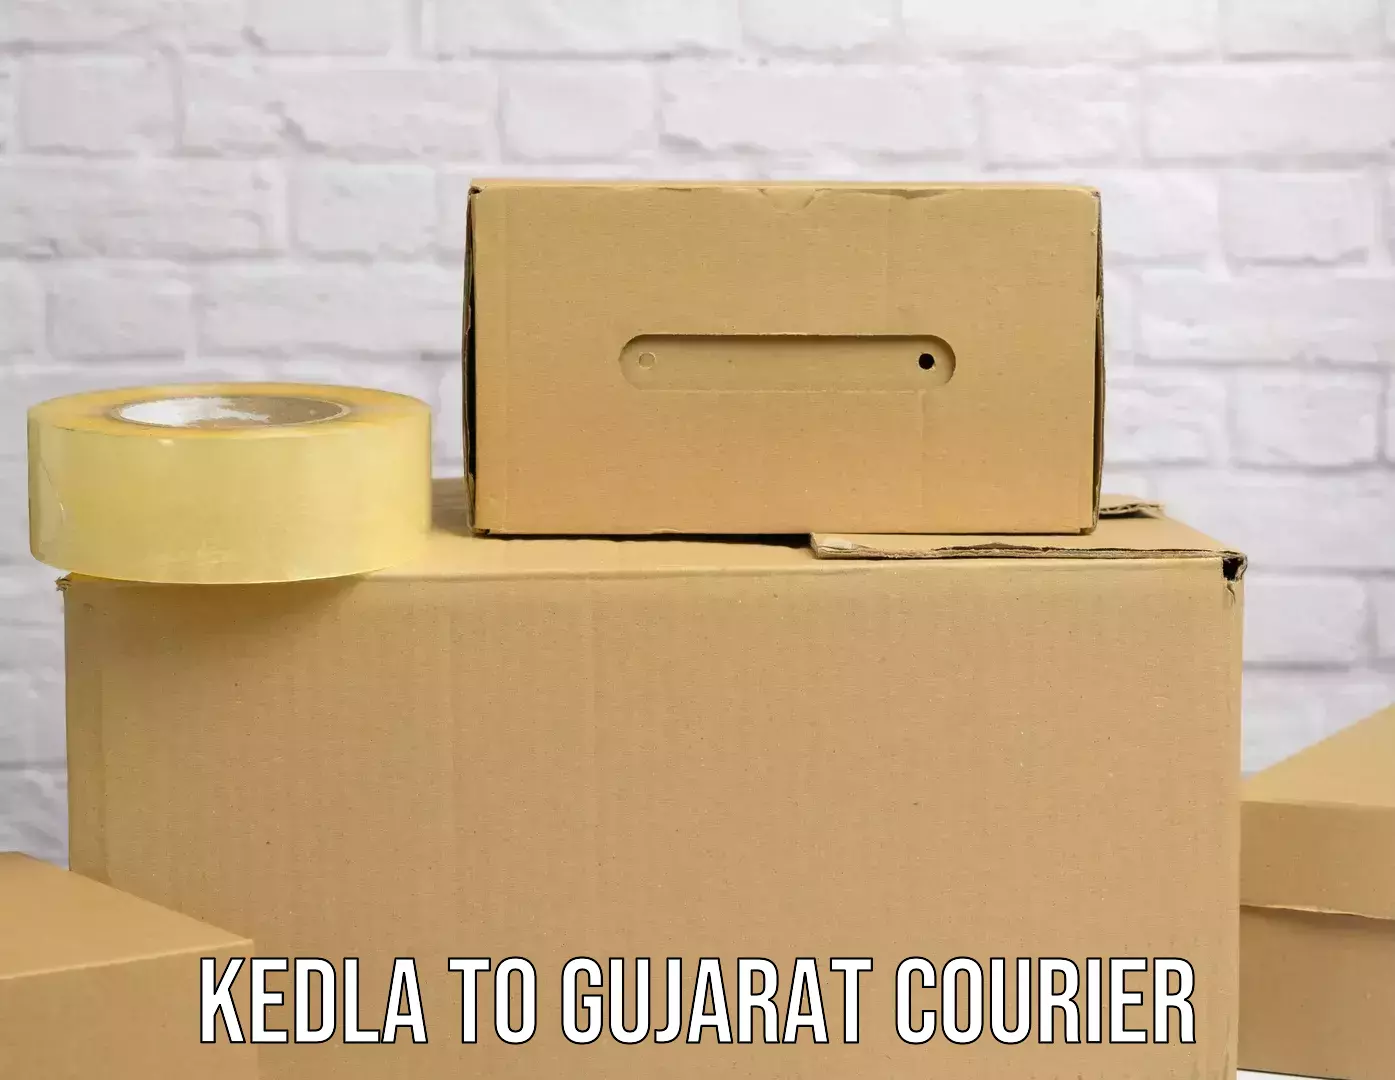 Express delivery solutions Kedla to Mehsana